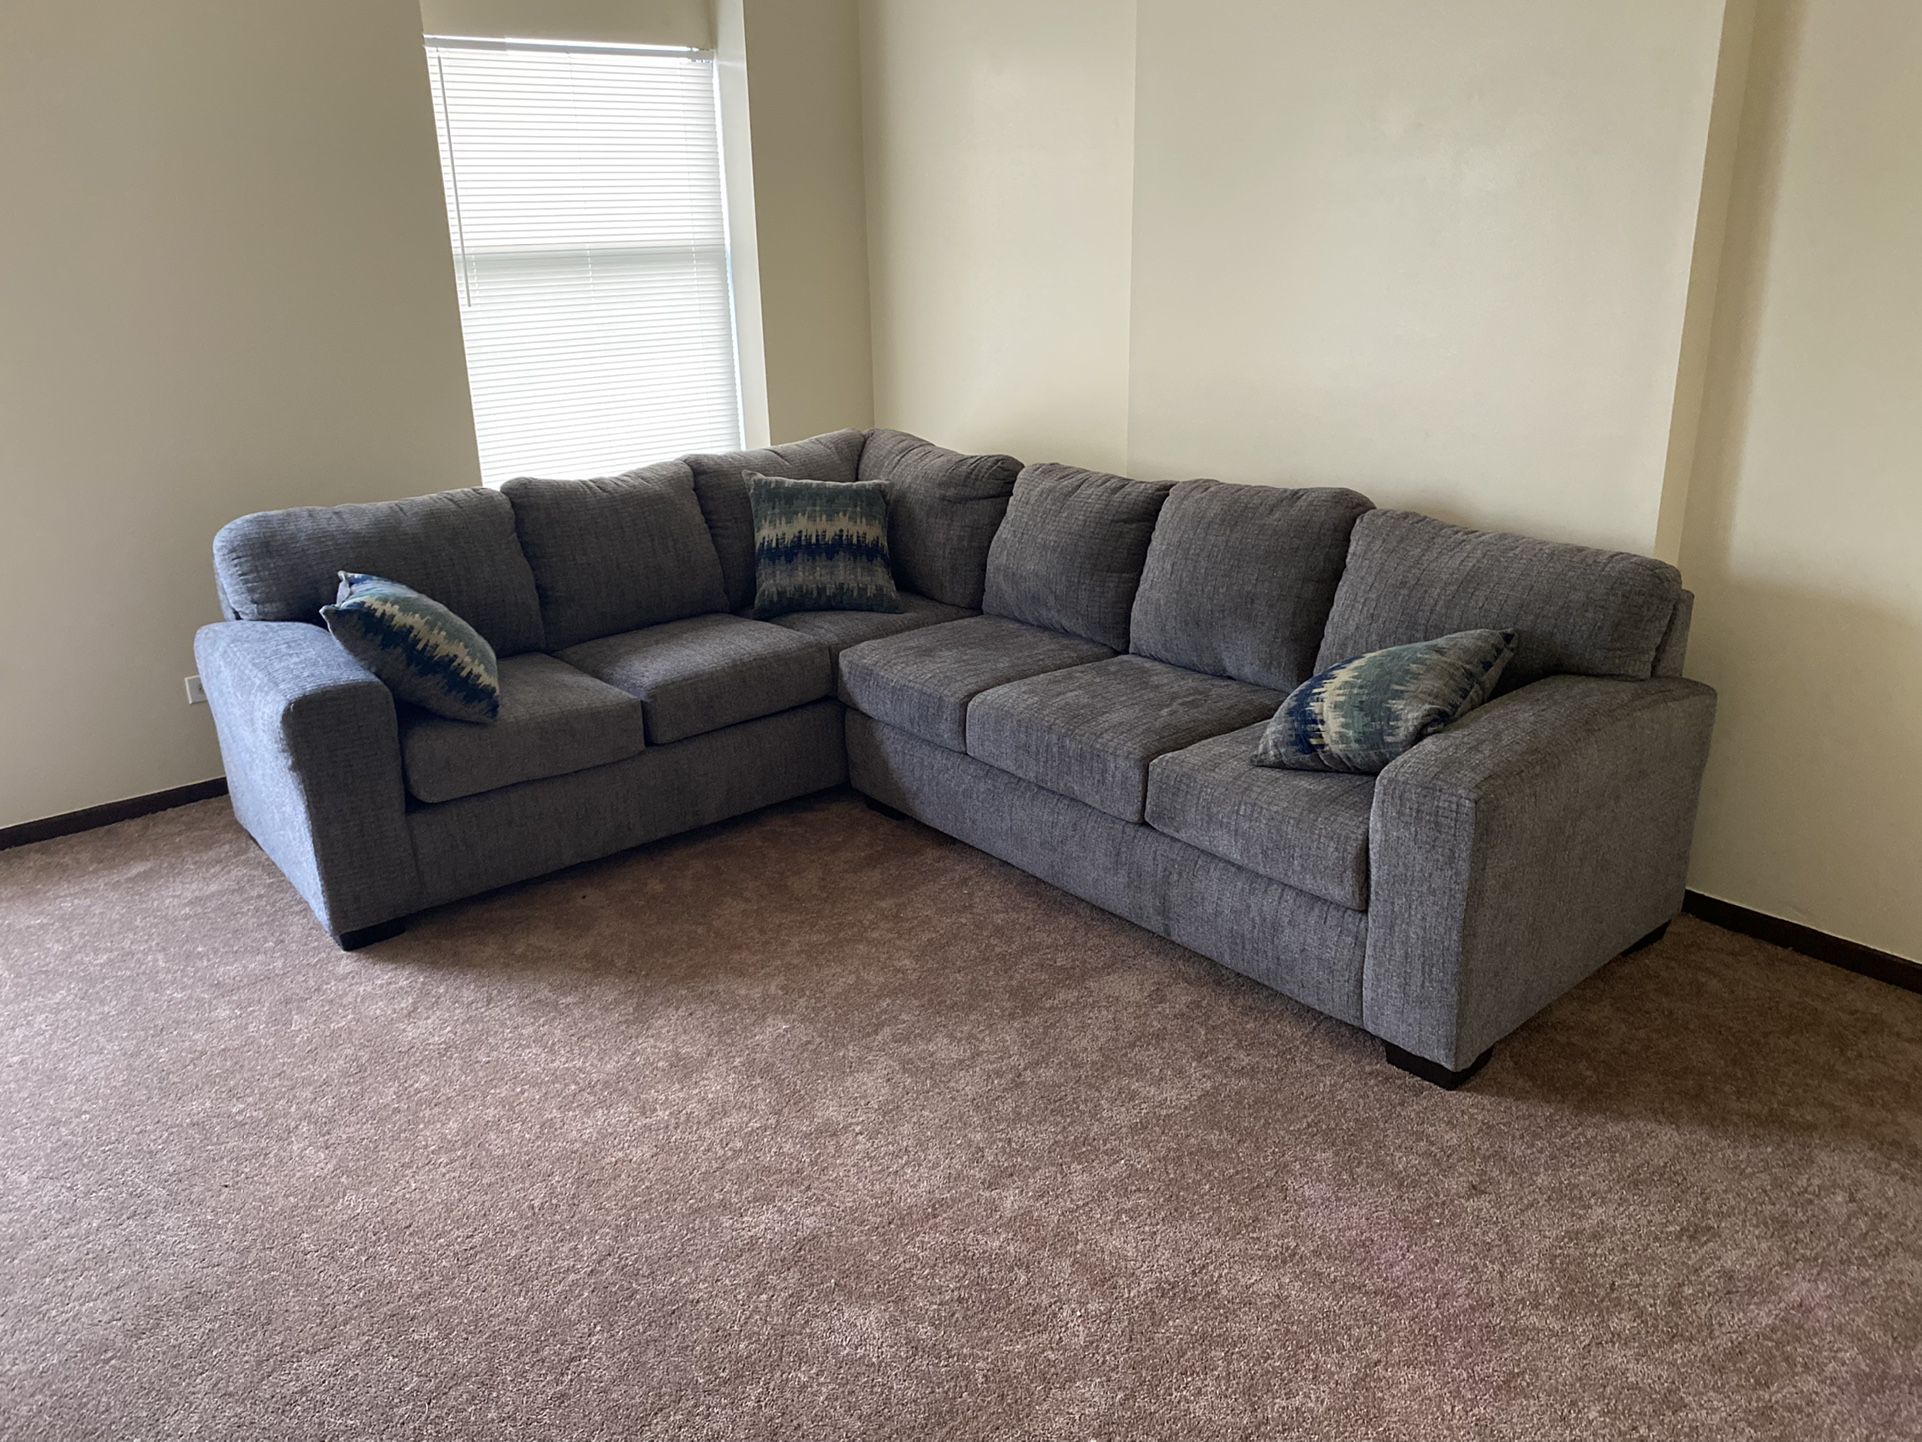 Large Grey Sectional Sofa Couch!! Brand New 